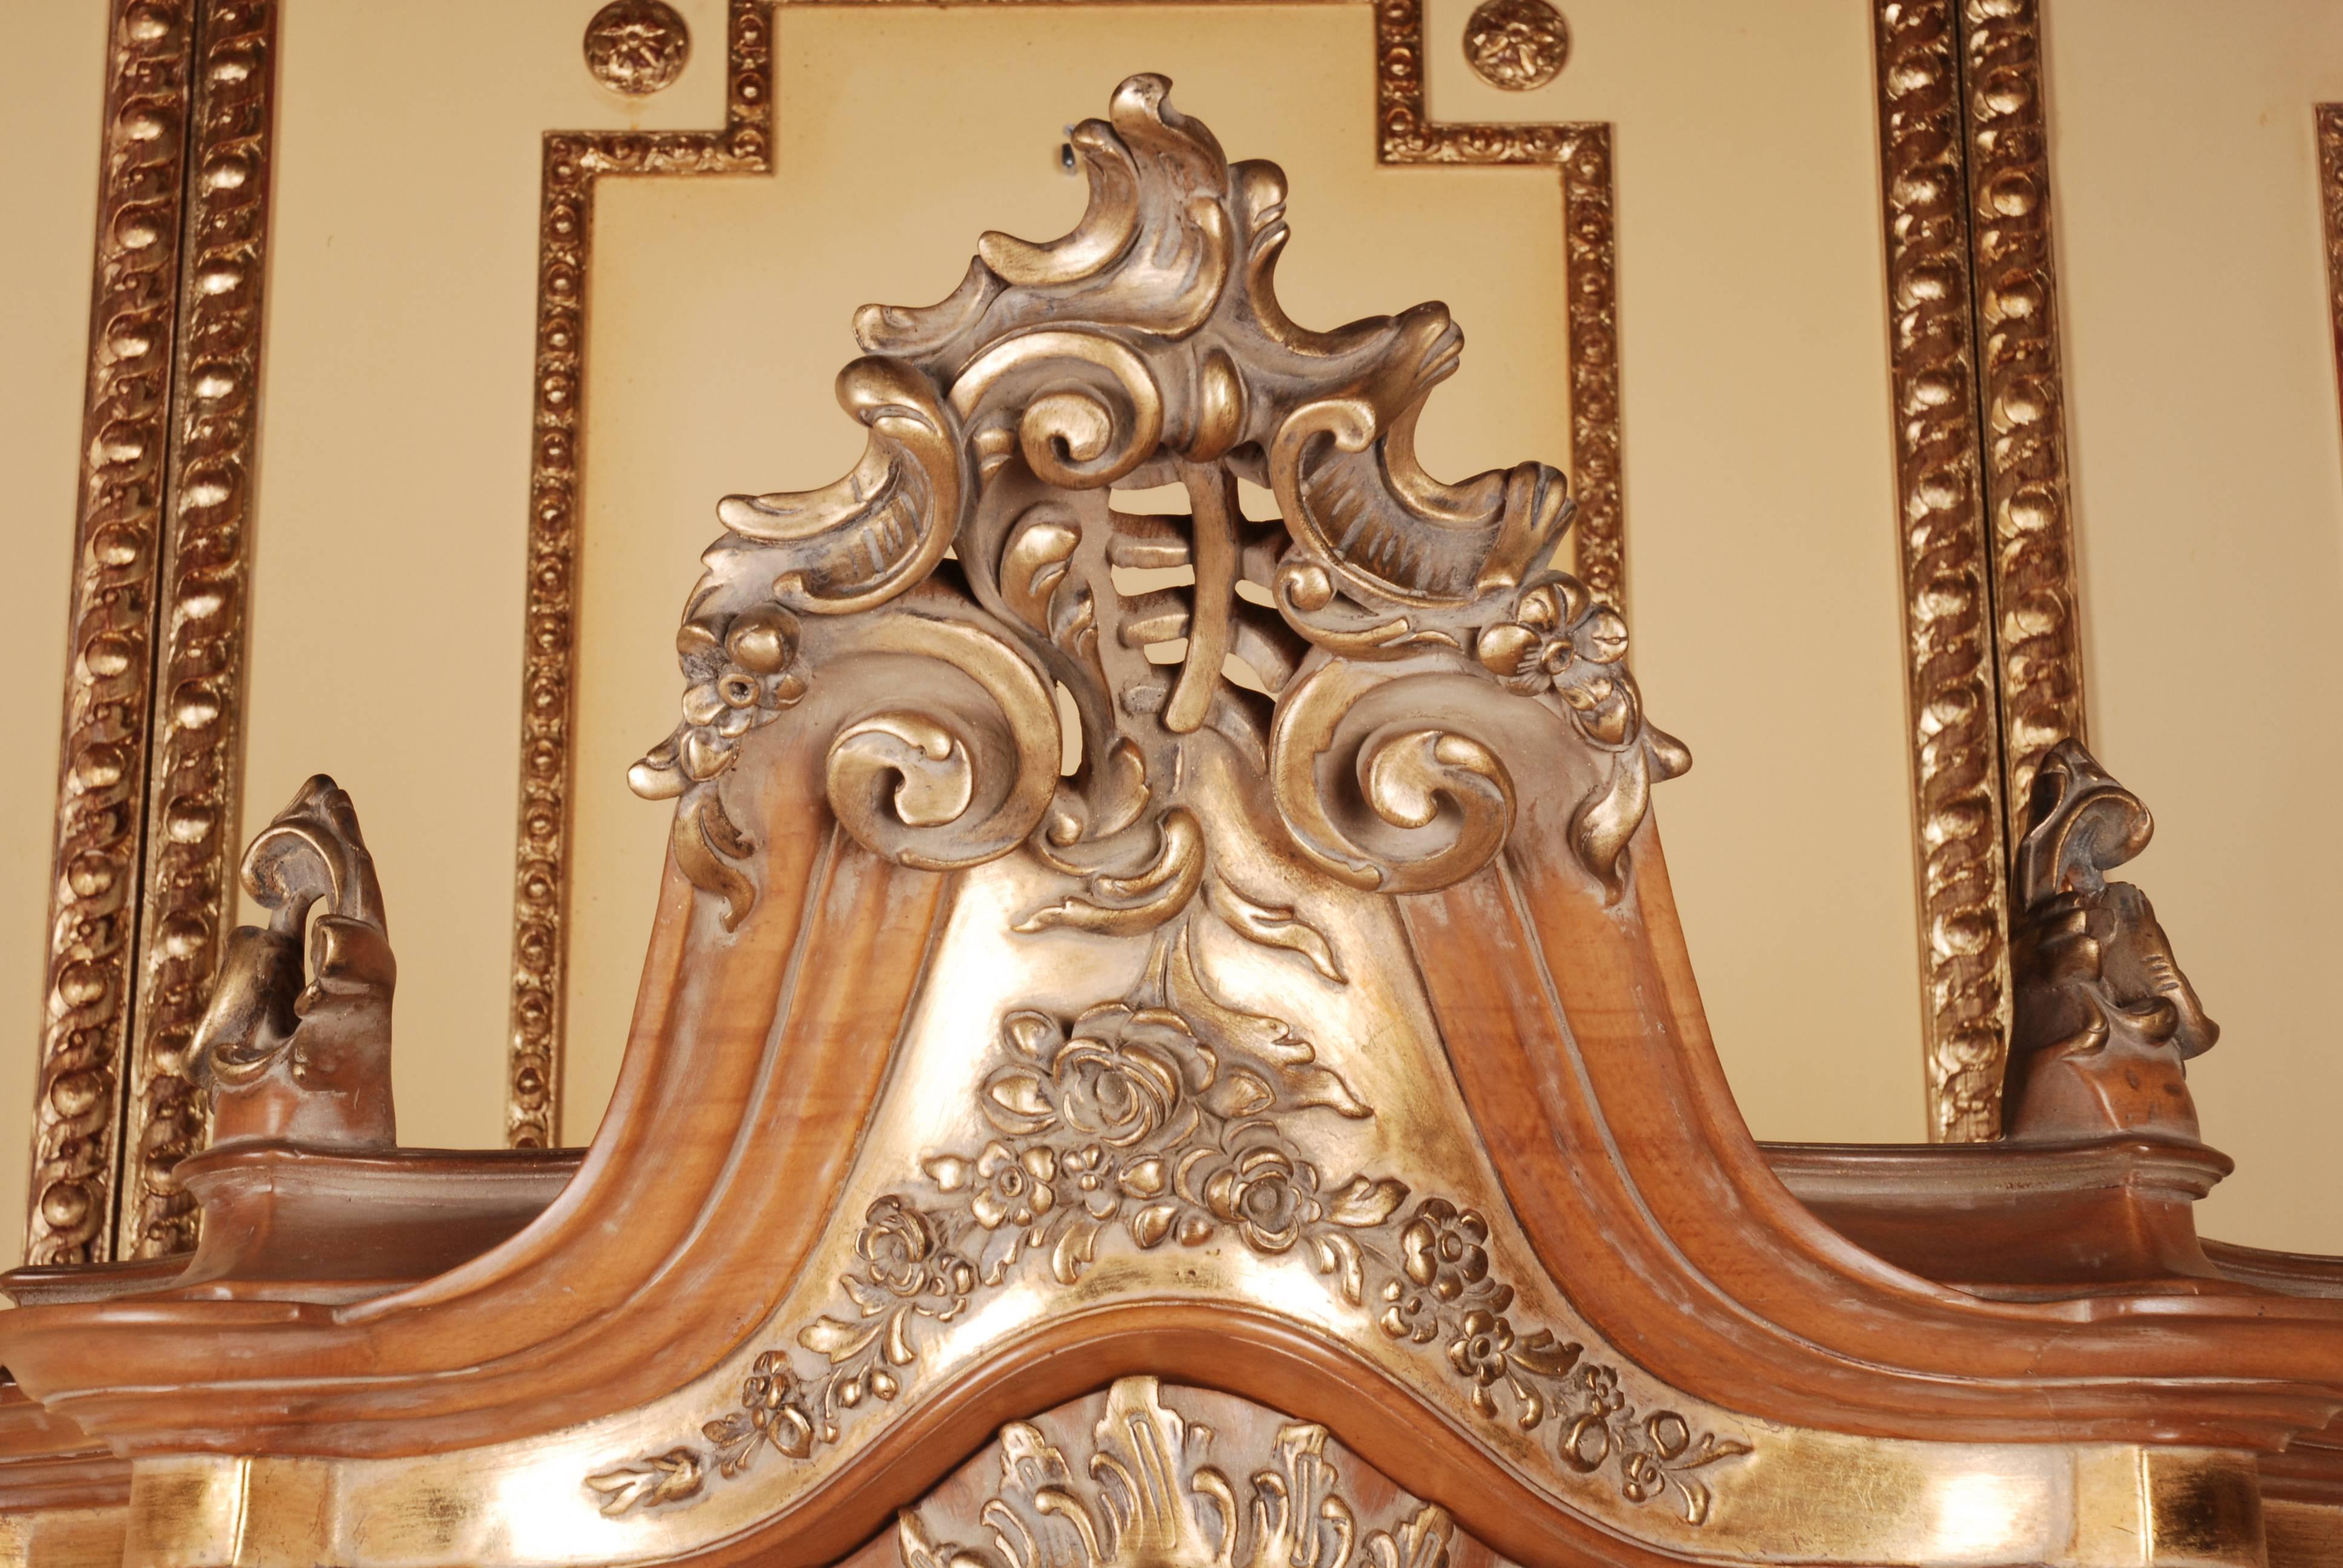 Solid beechwood, finely carved and polished, poliment gilded. High-rectangular, one-armed, cambered and three-glazed corpus on high, oblique, volute-like, curly feet, connected with crossed, richly carved middle bridge. Three-sided scalloped,